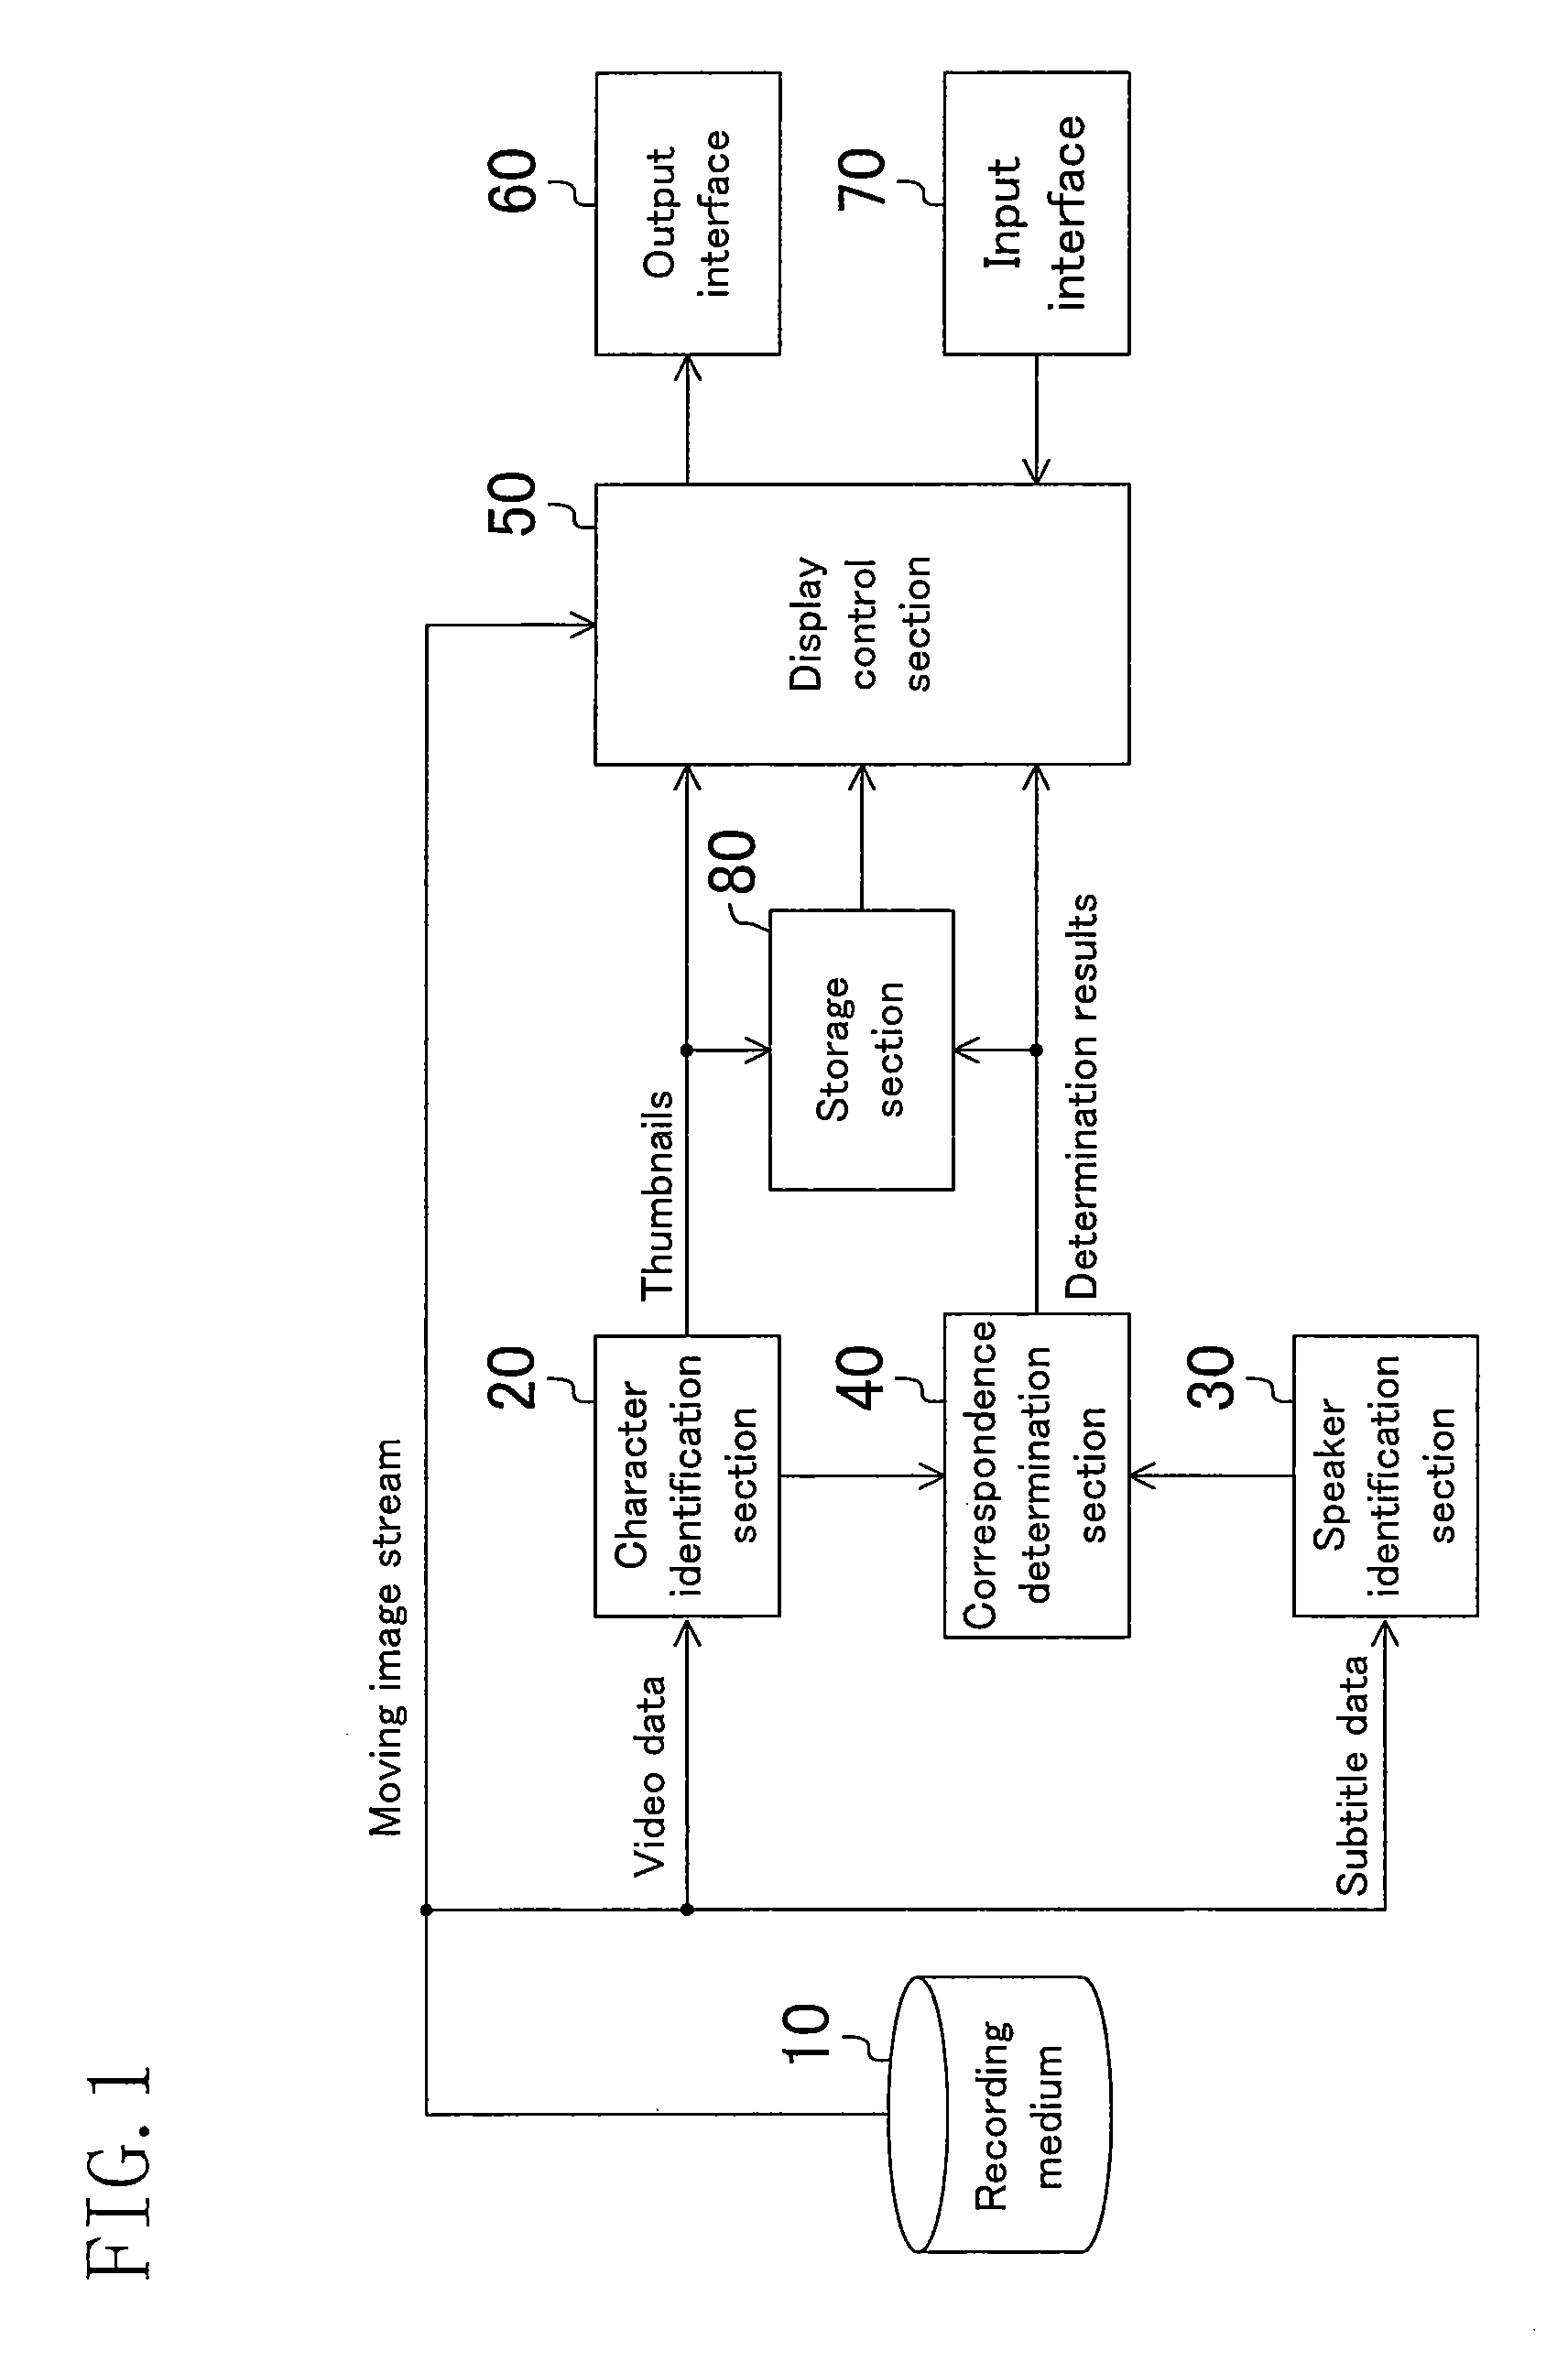 Digest playback apparatus and method